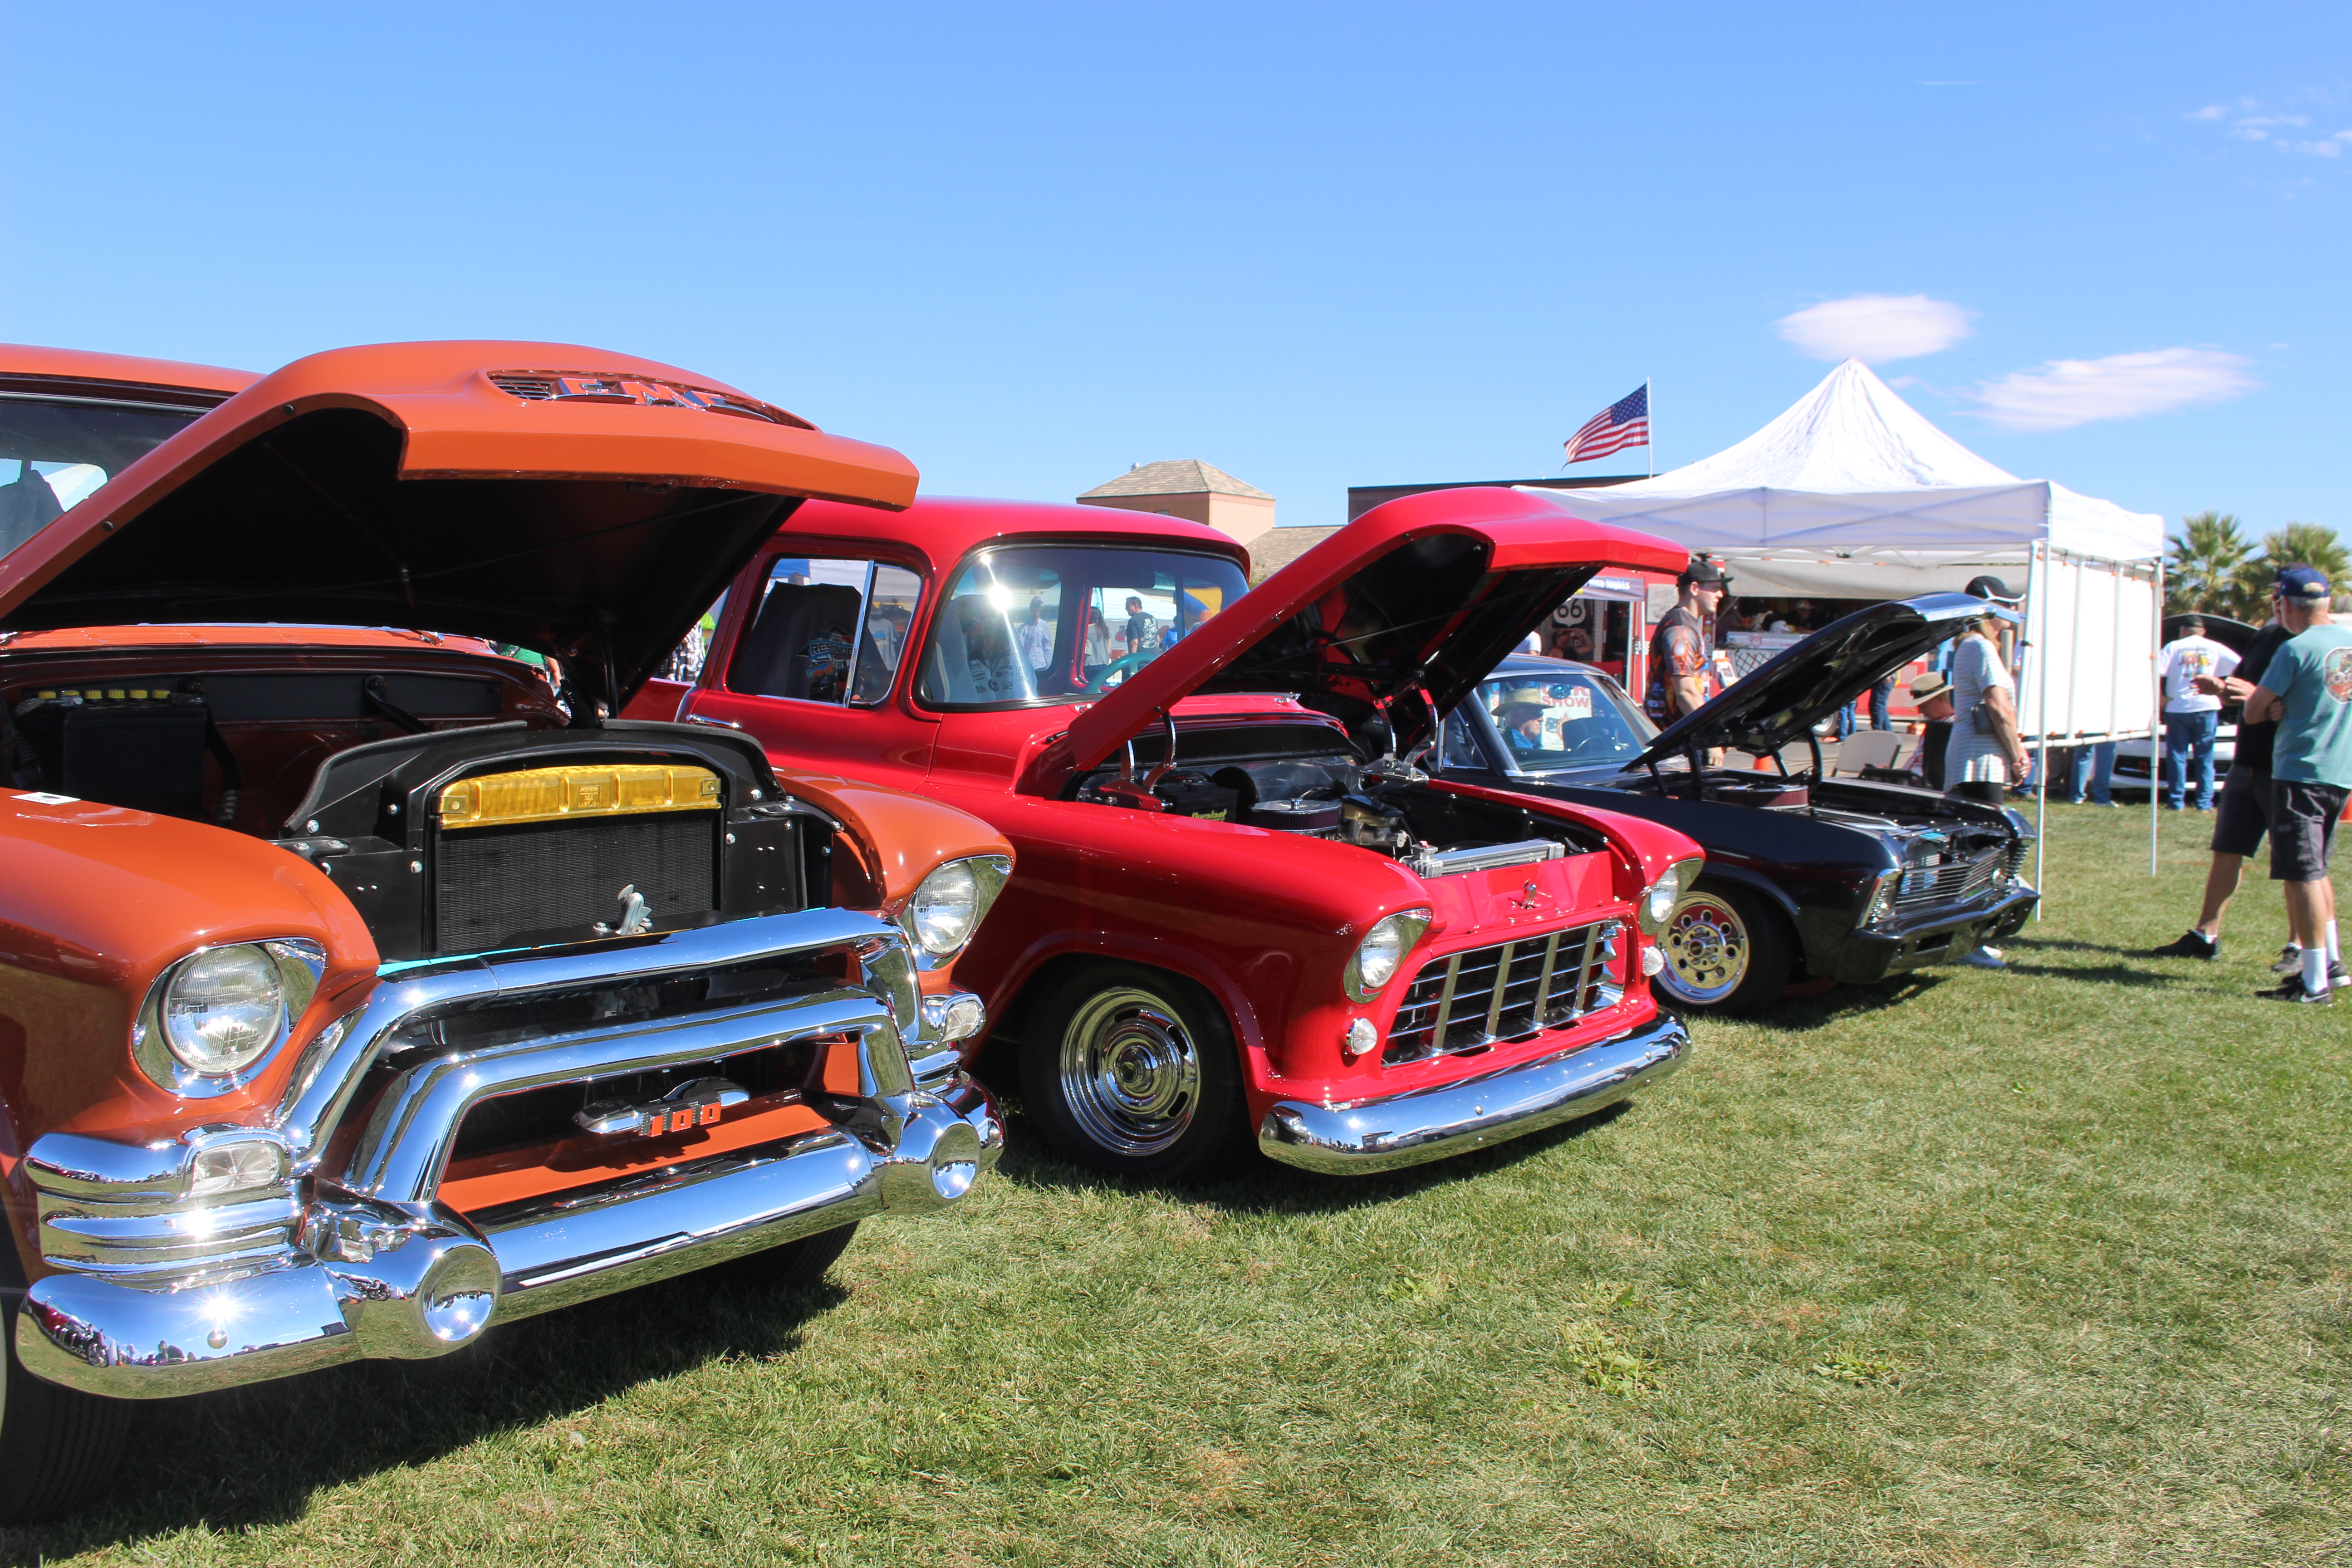 Biggest car show yet coming to Brio to benefit Project Lifesaver ...